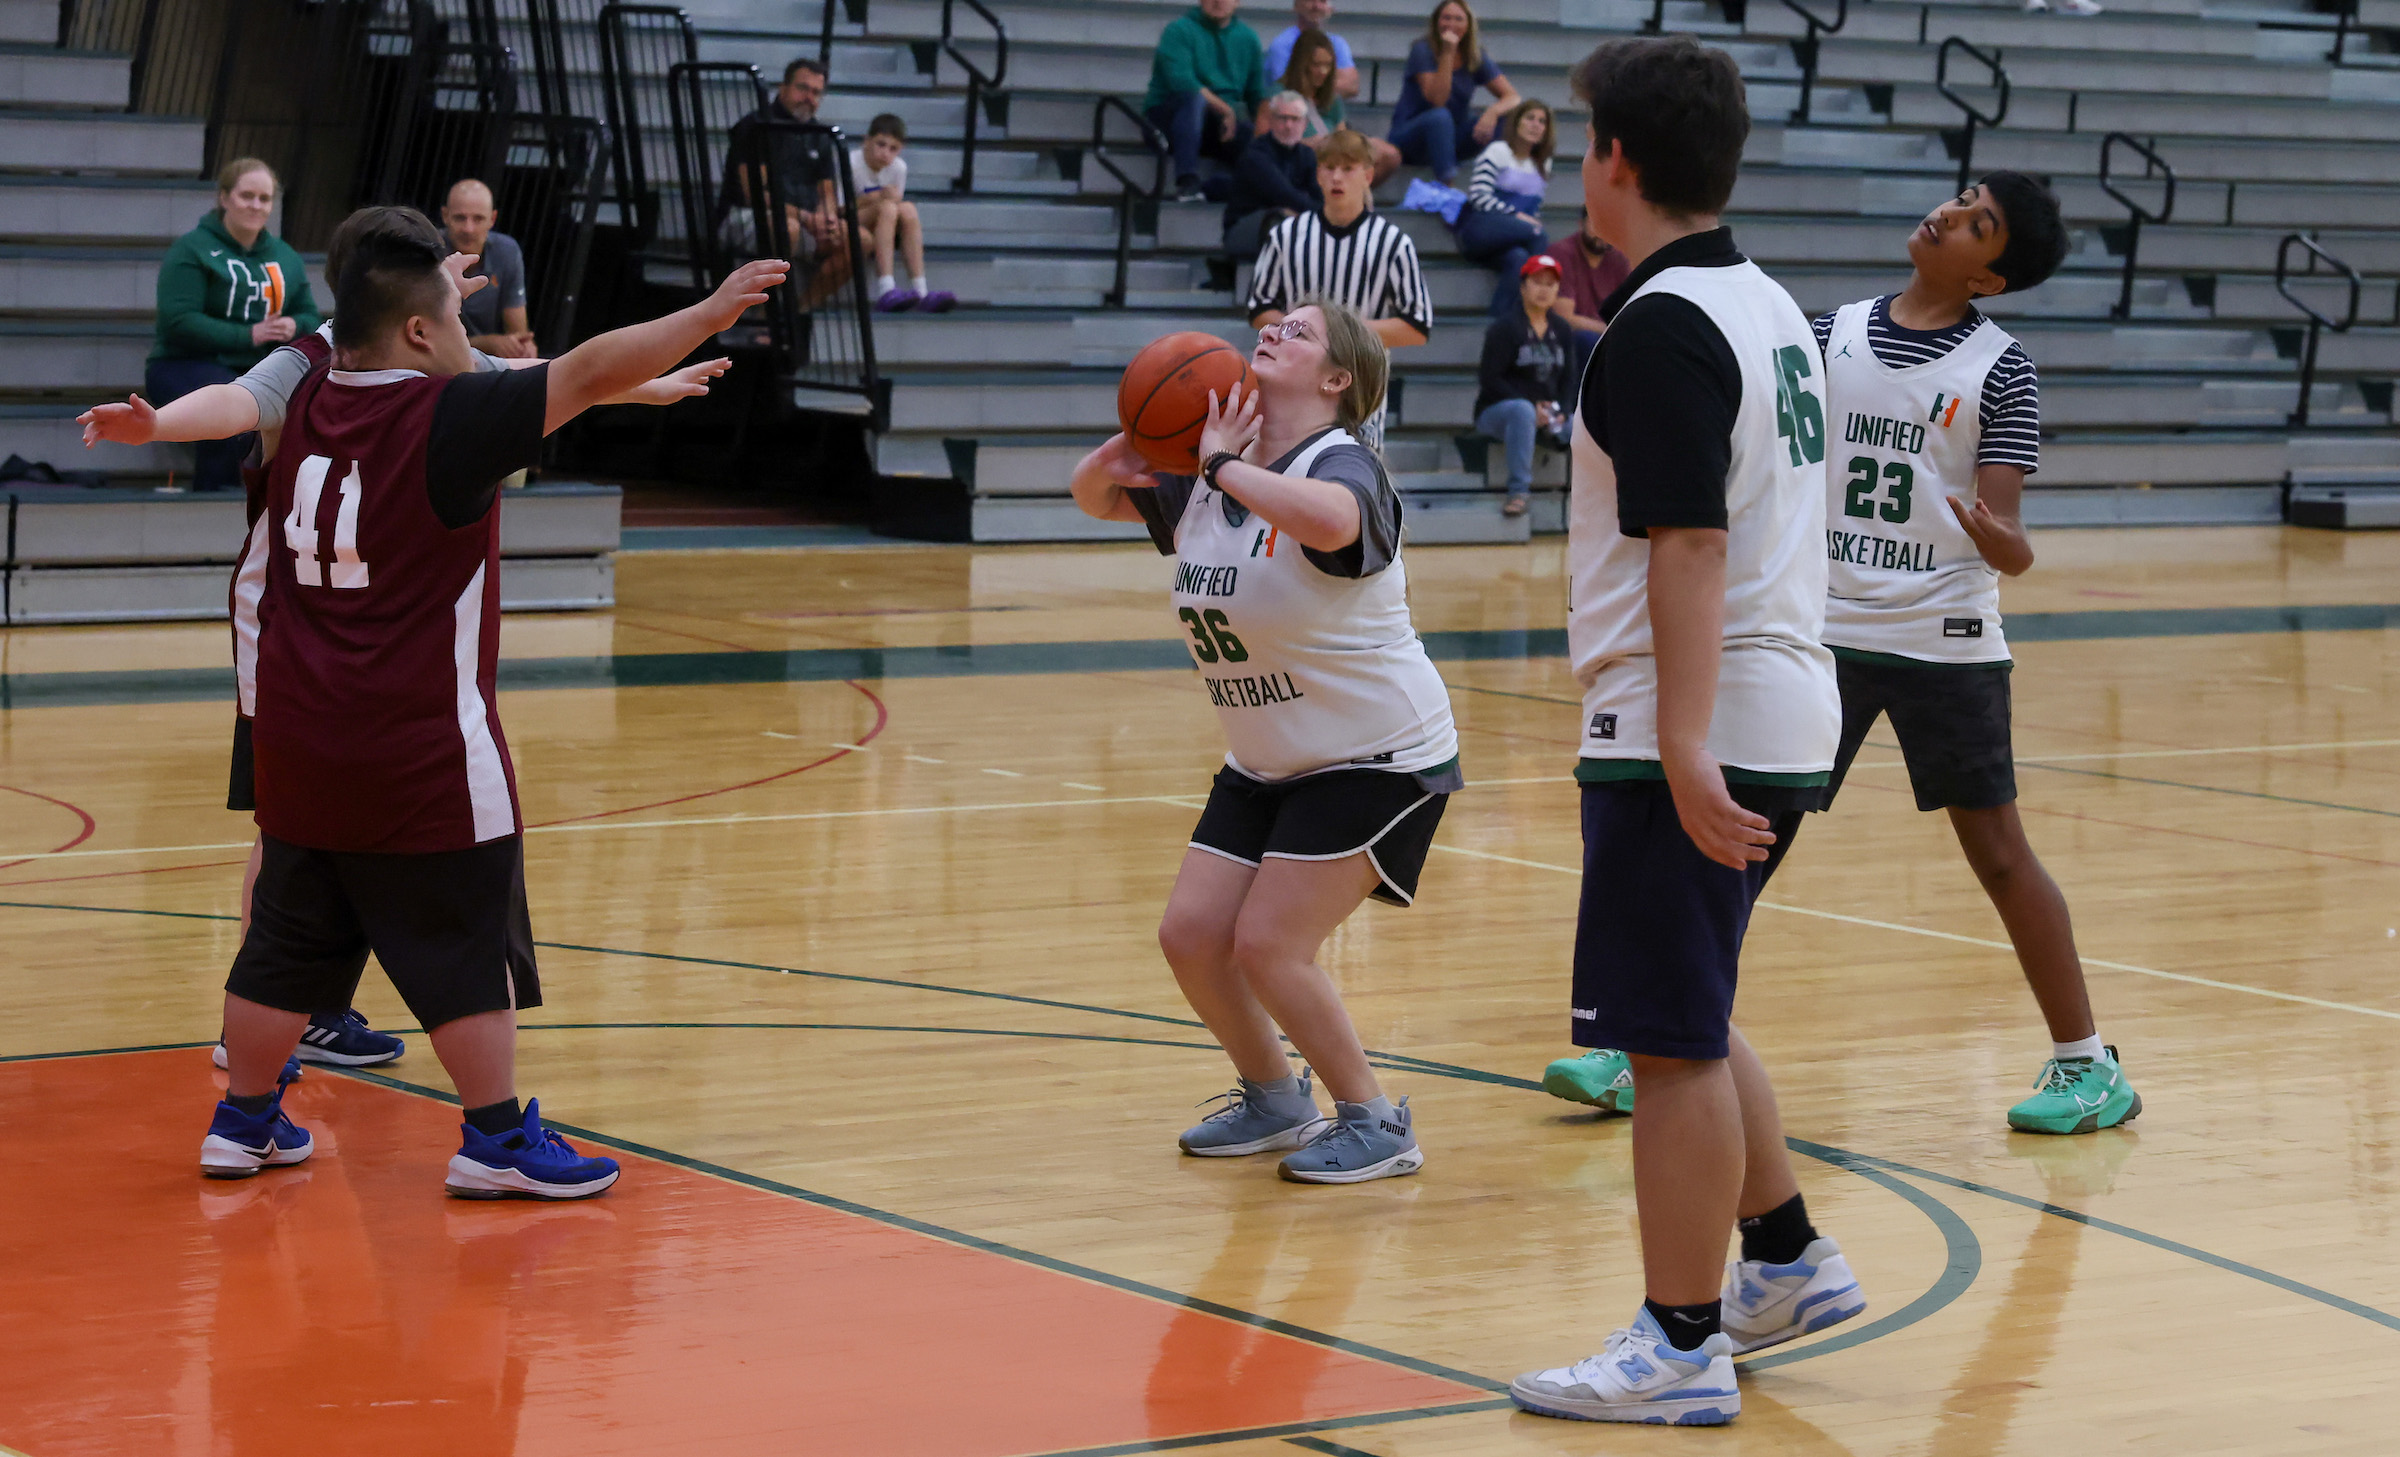 Photos: HHS unified basketball wins opener